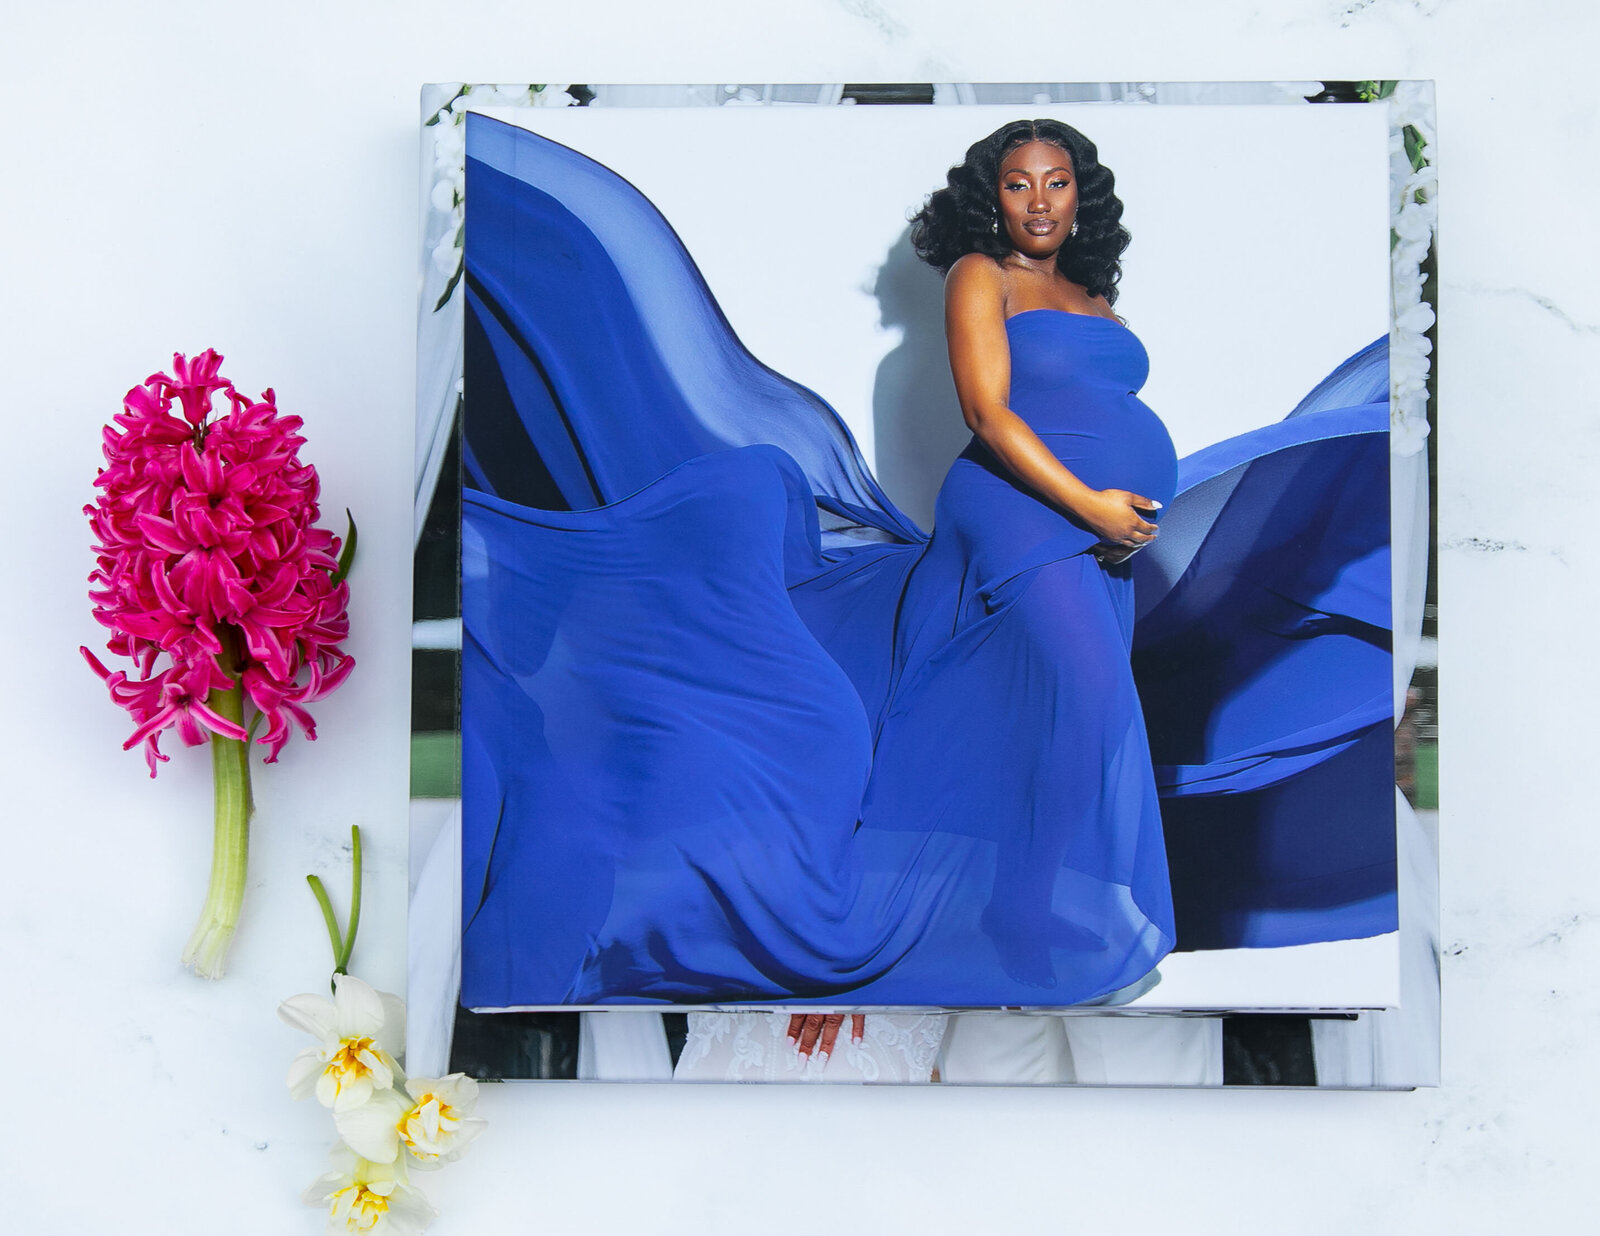 Maternity Albums for any expecting mother with Atlanta Photography services by Bonnie Blu